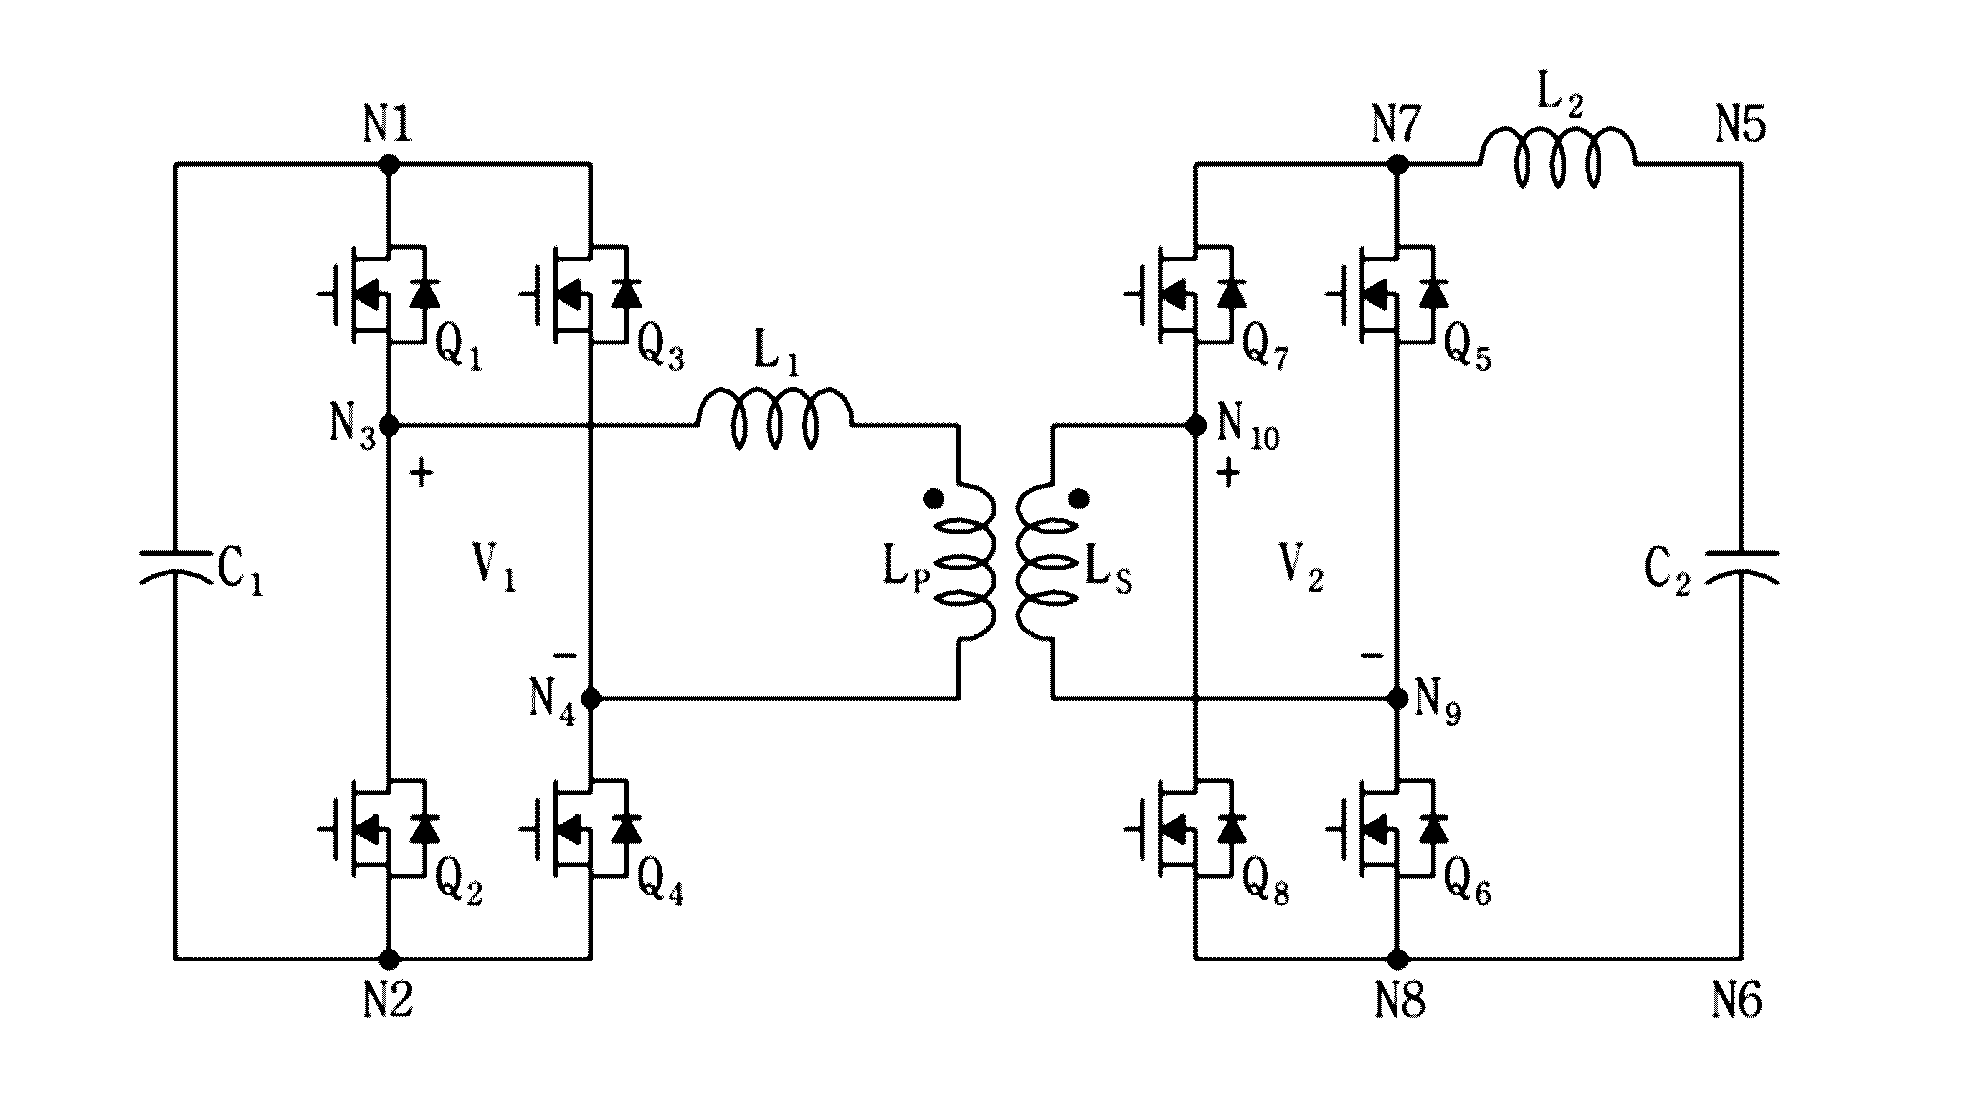 Electric power convertion apparatus and method of operating the same